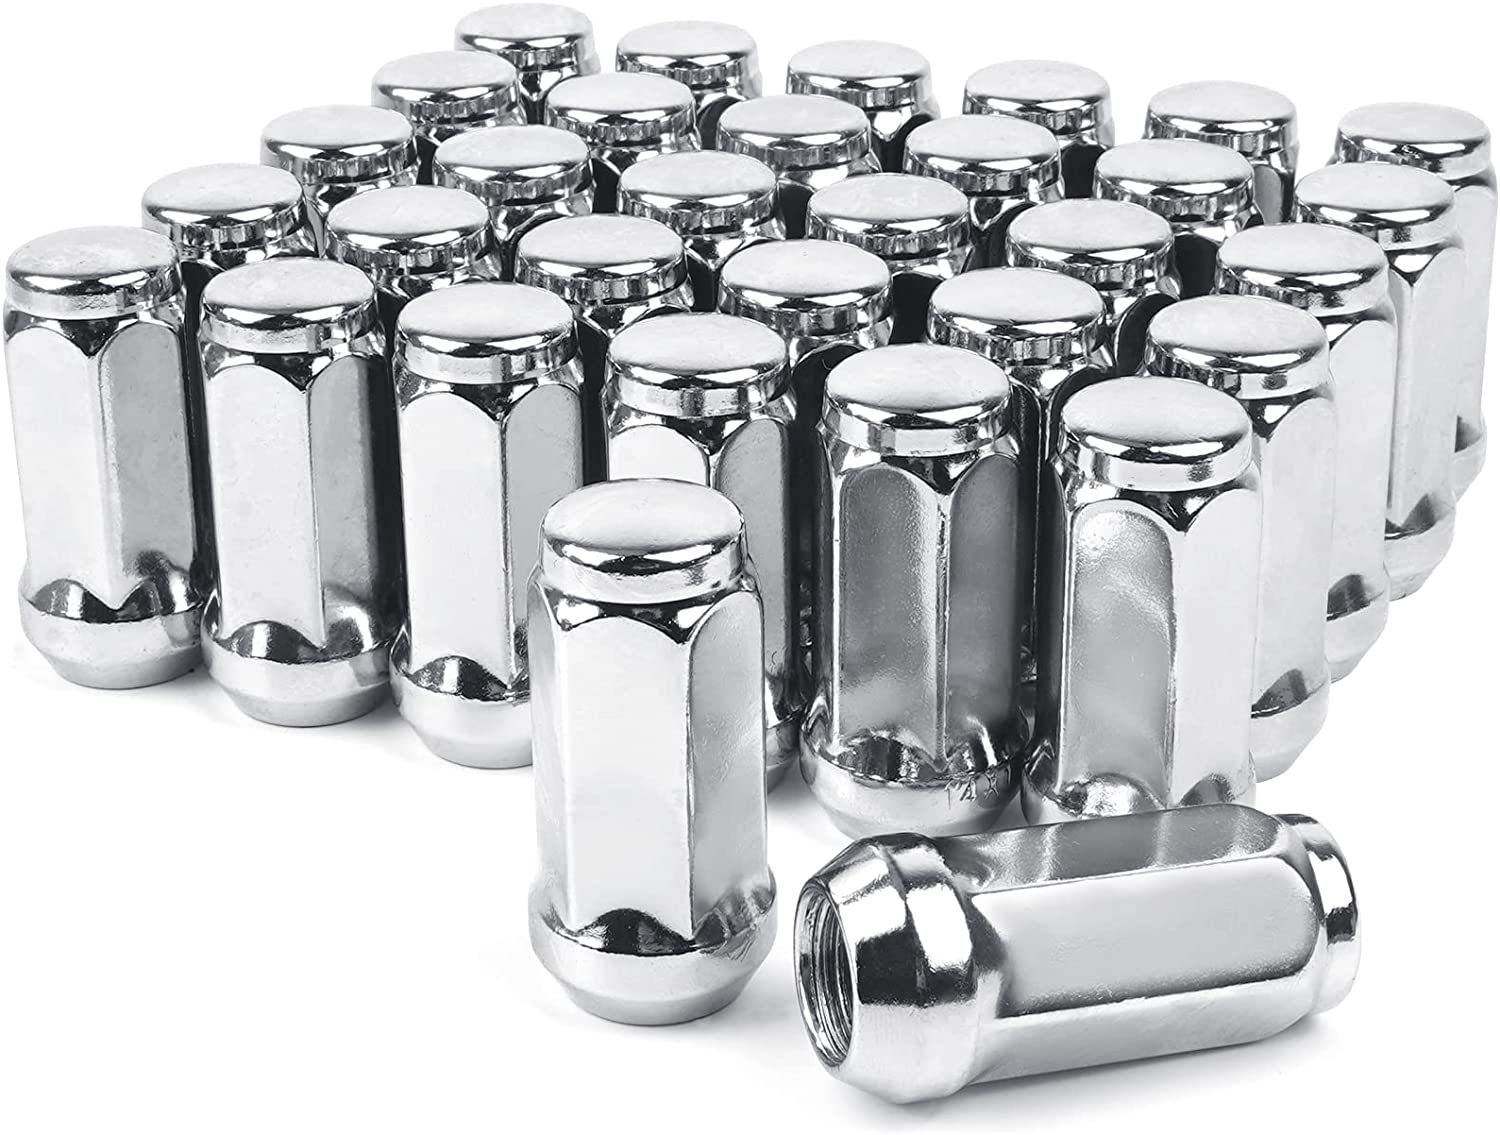 MIKKUPPA M14x1.5 Lug Nuts with Cone Seat 19mm (3/4